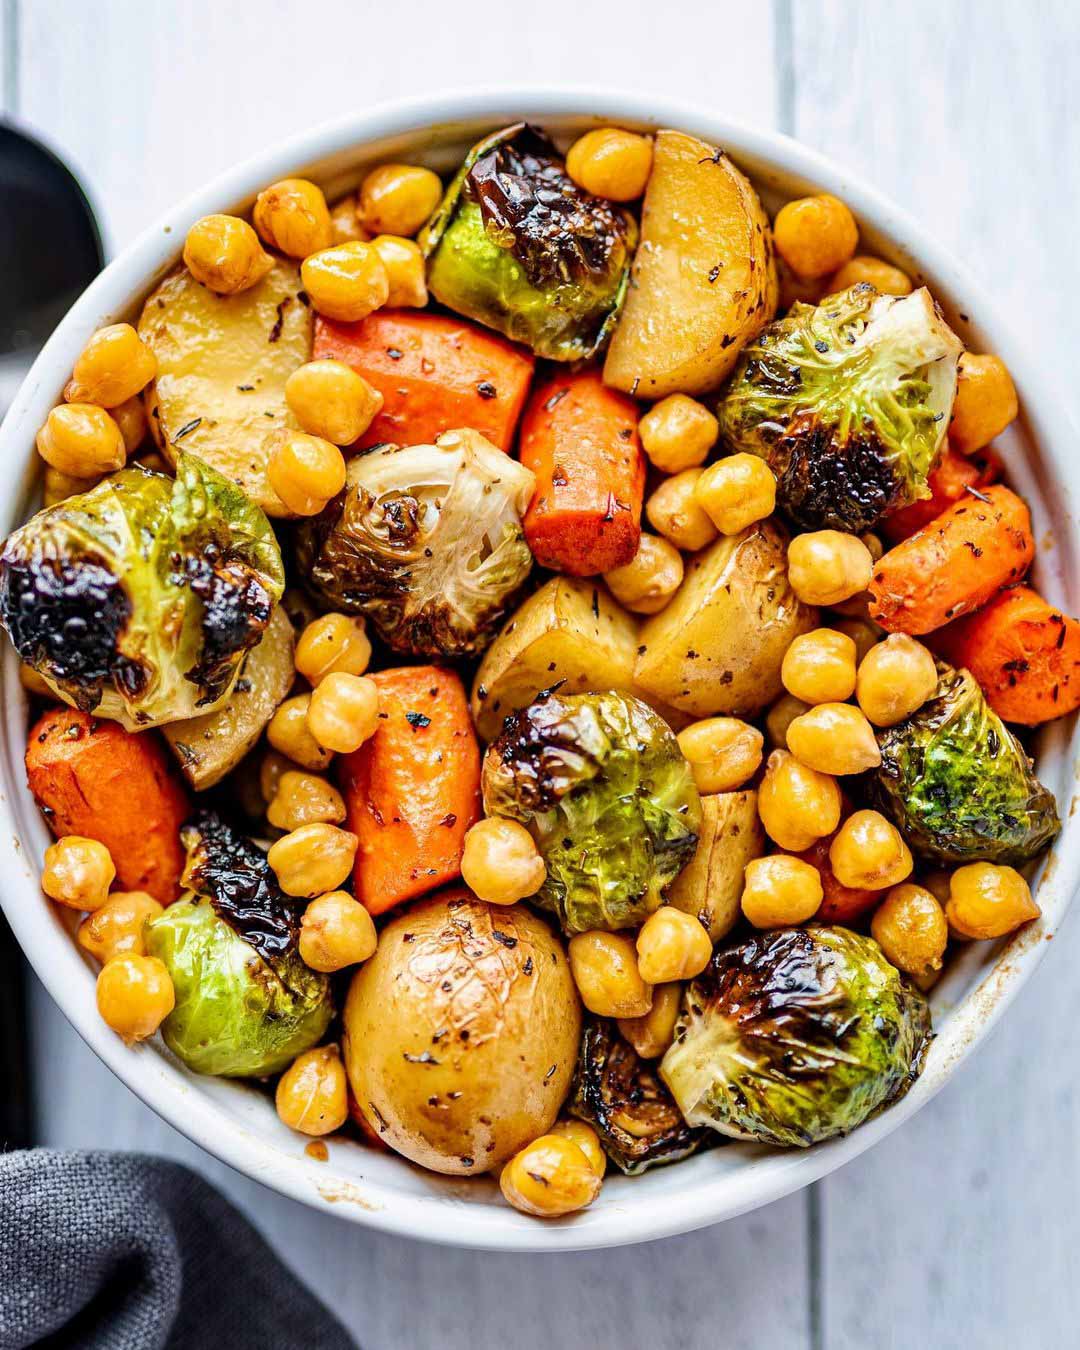 Balsamic-Maple Roasted Veggies & Chickpeas recipe served in a bowl.